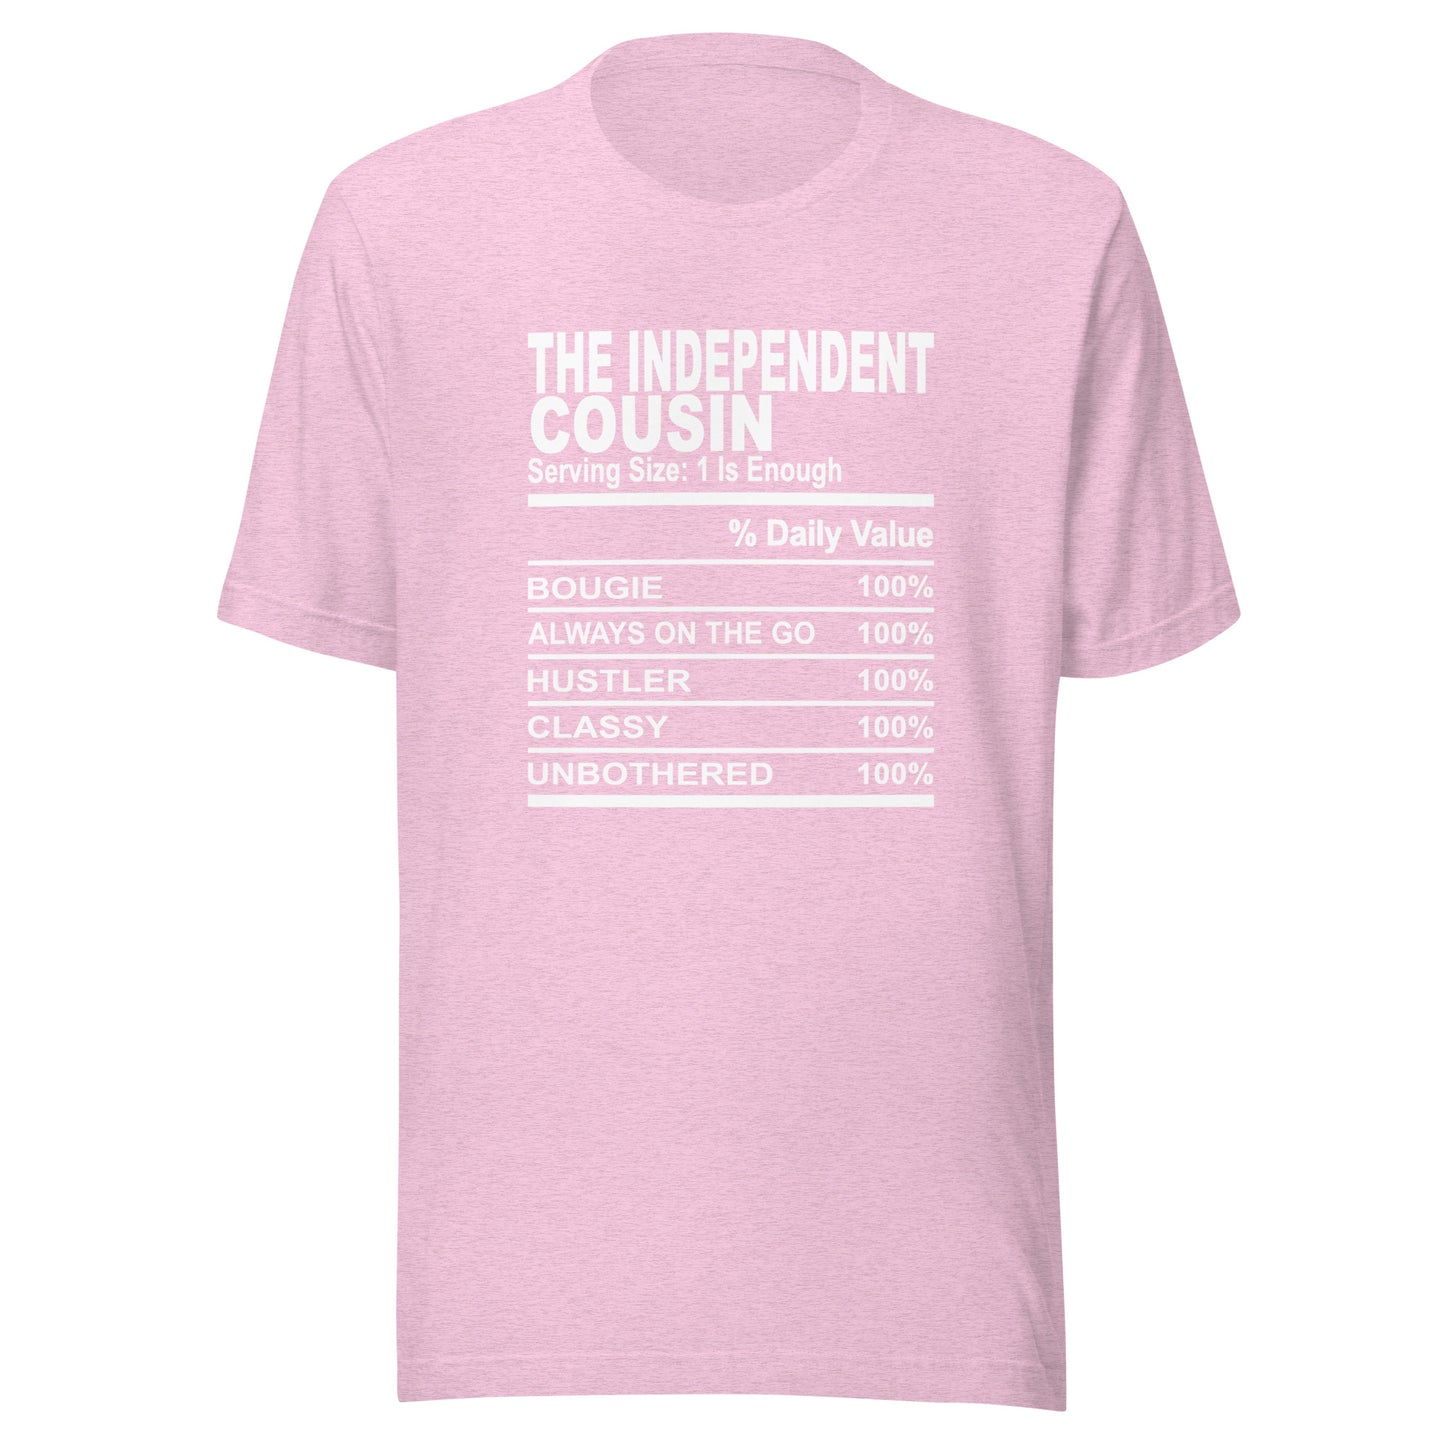 THE INDEPENDENT COUSIN - 4XL - Unisex T-Shirt (white print)